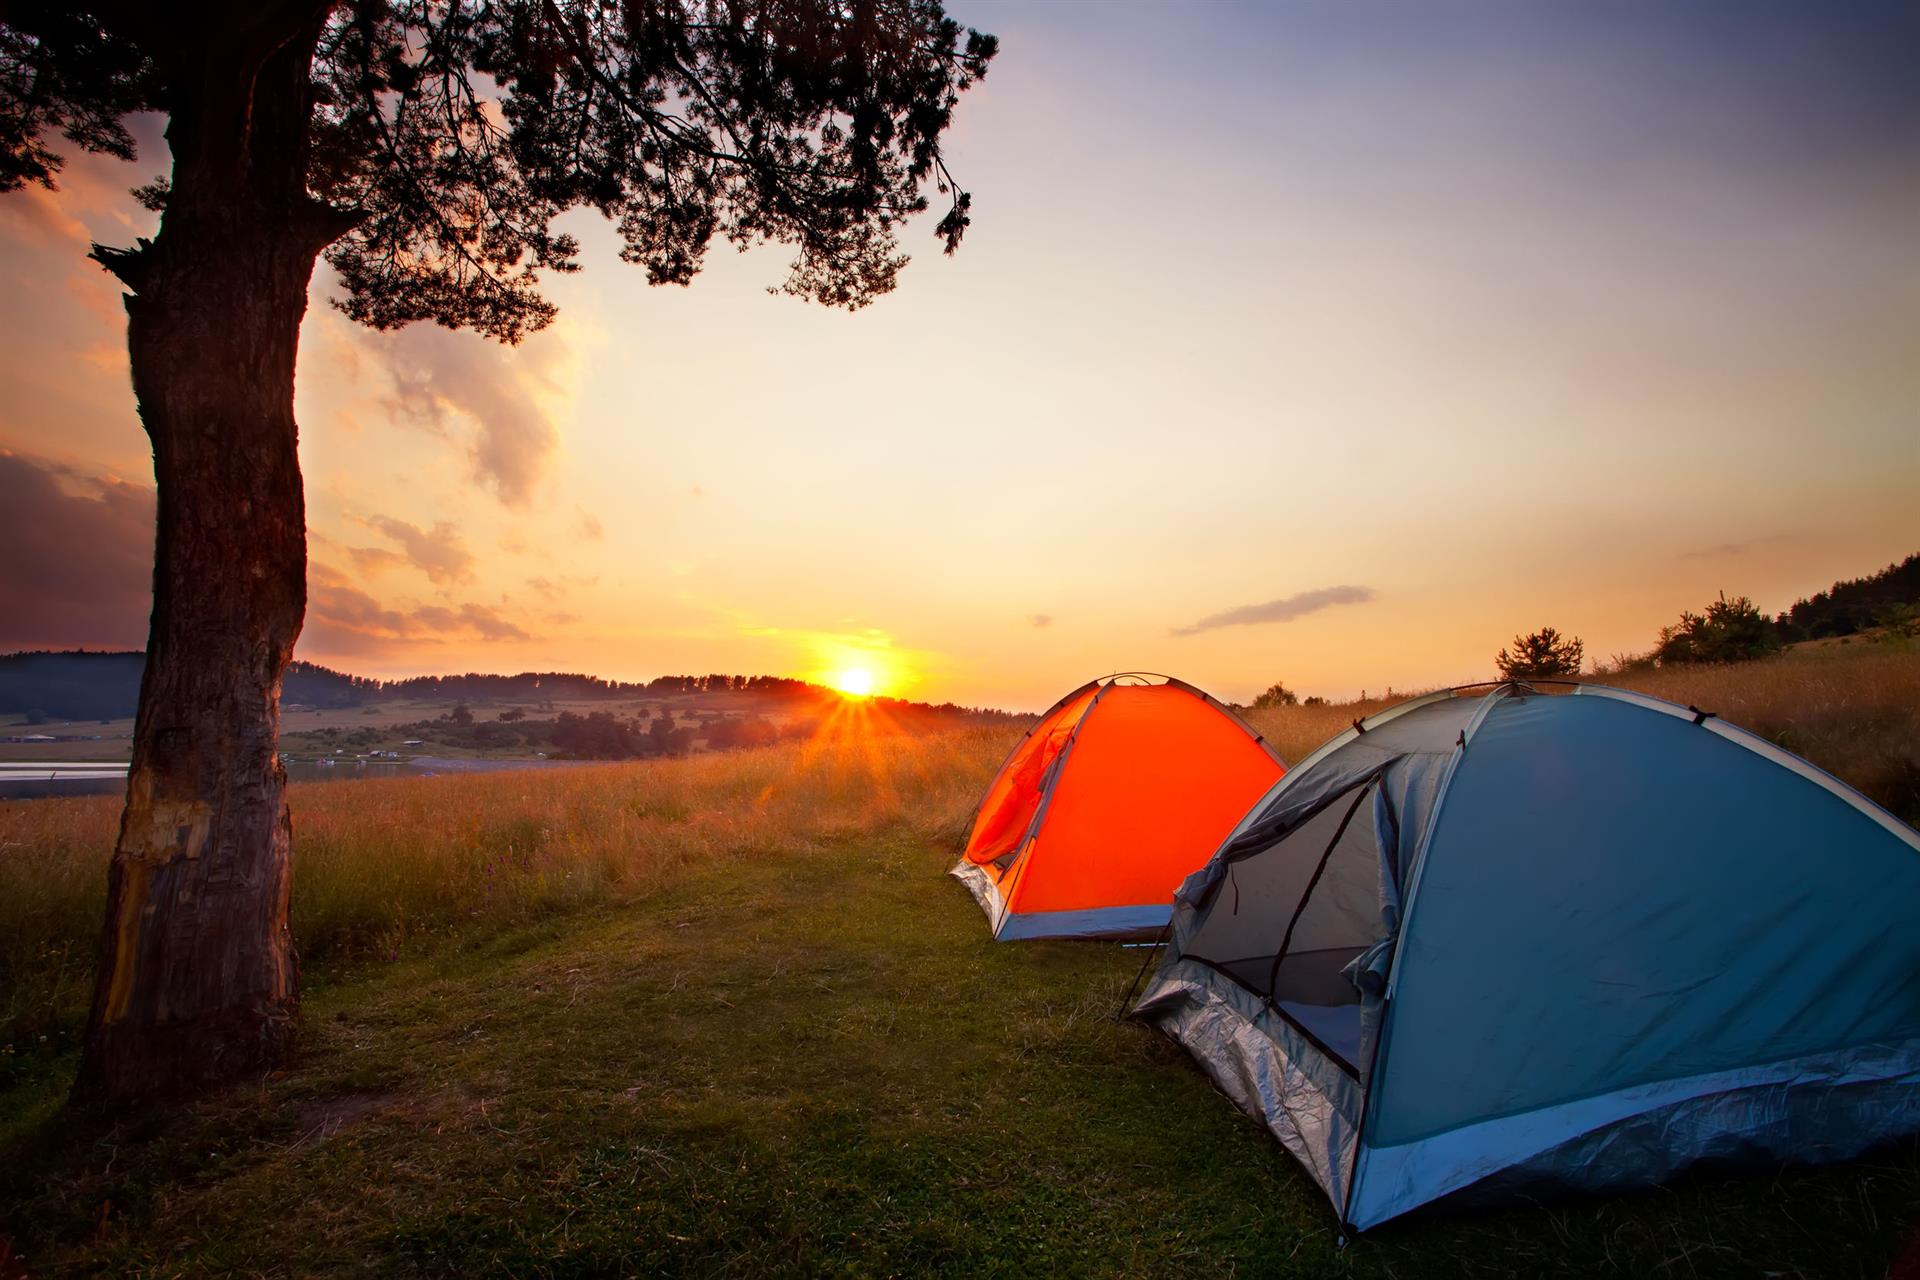 Cool Outdoor Gear For Summer: Tree Tents And Solar Paper